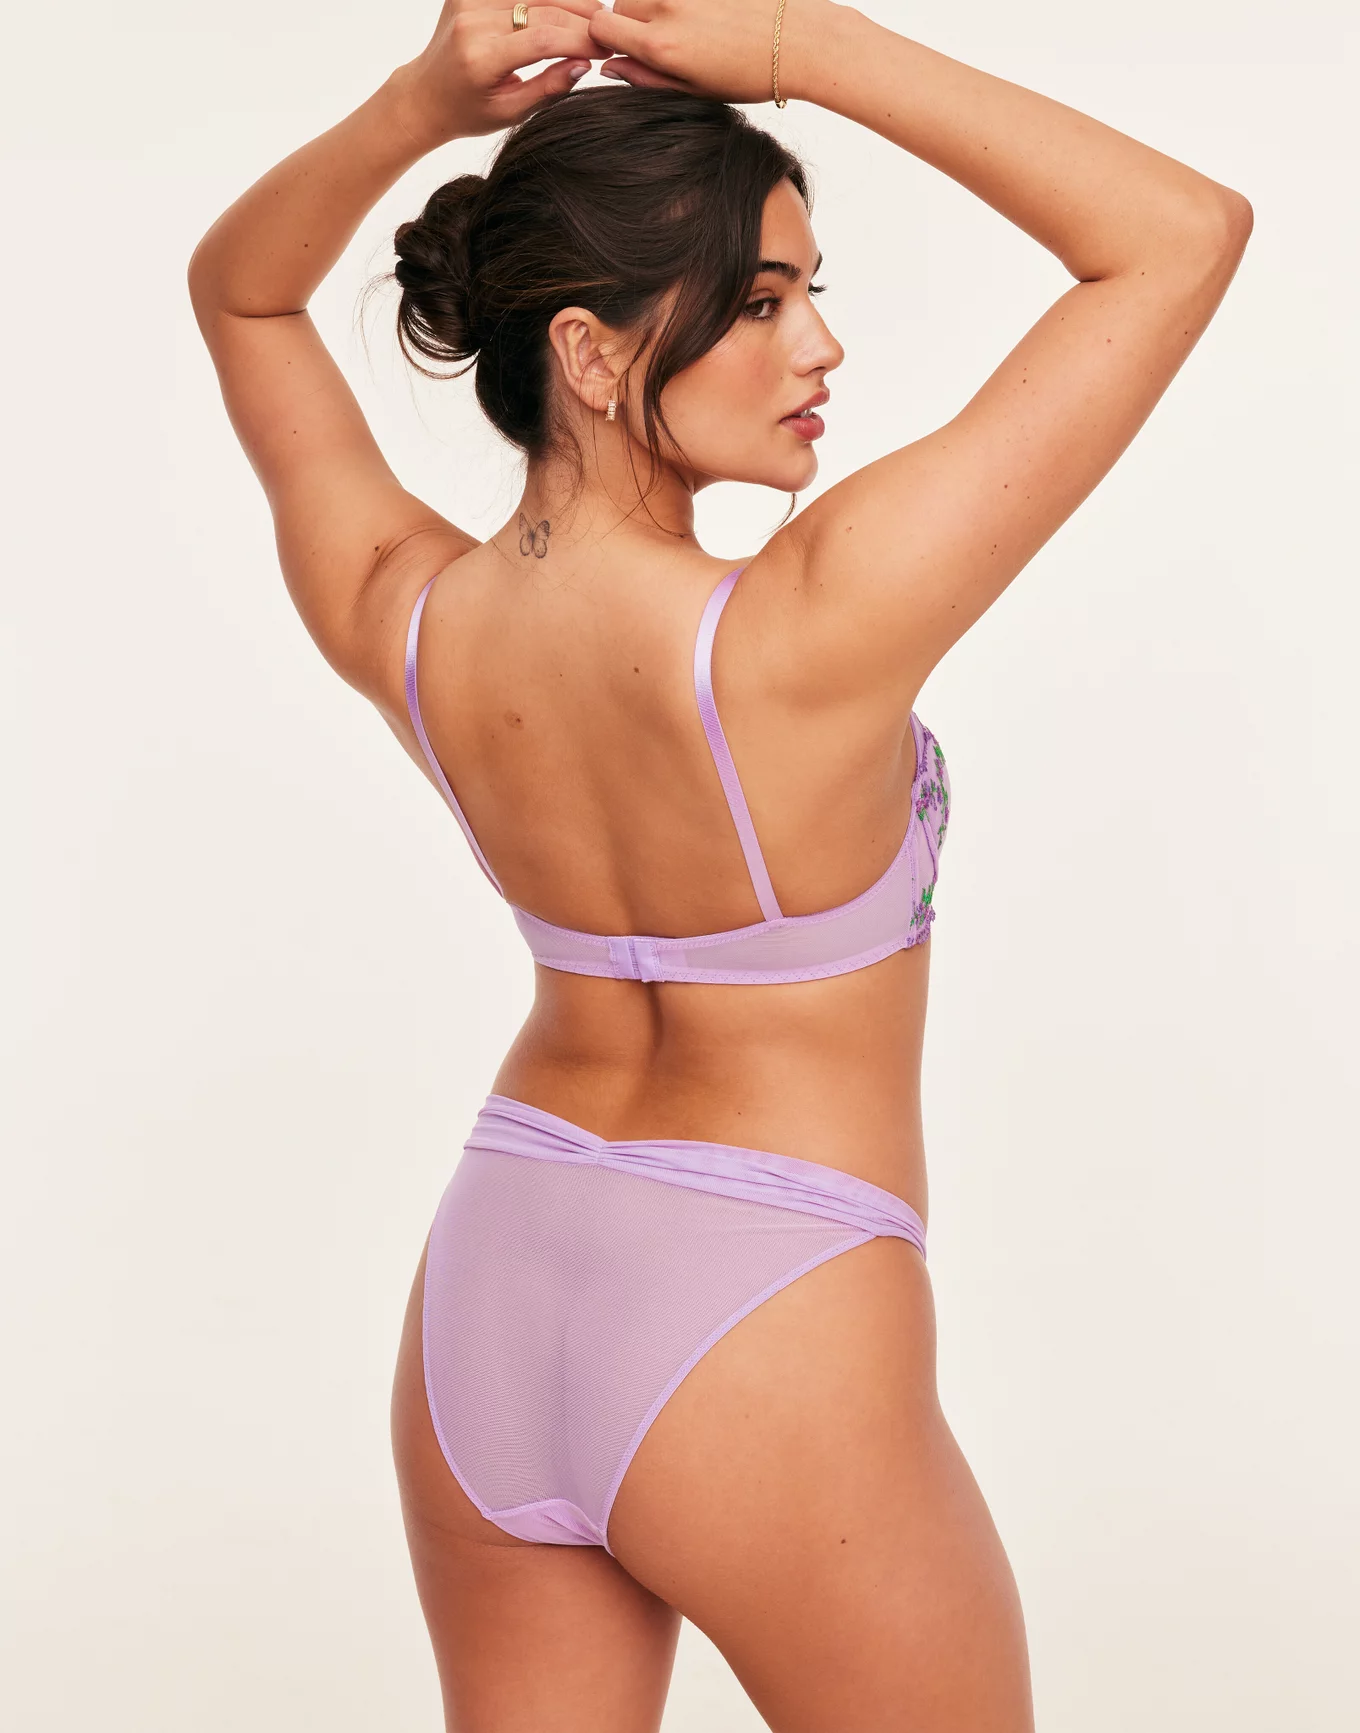 Sophy Medium Purple Balconette with Removable Push Up Cookies